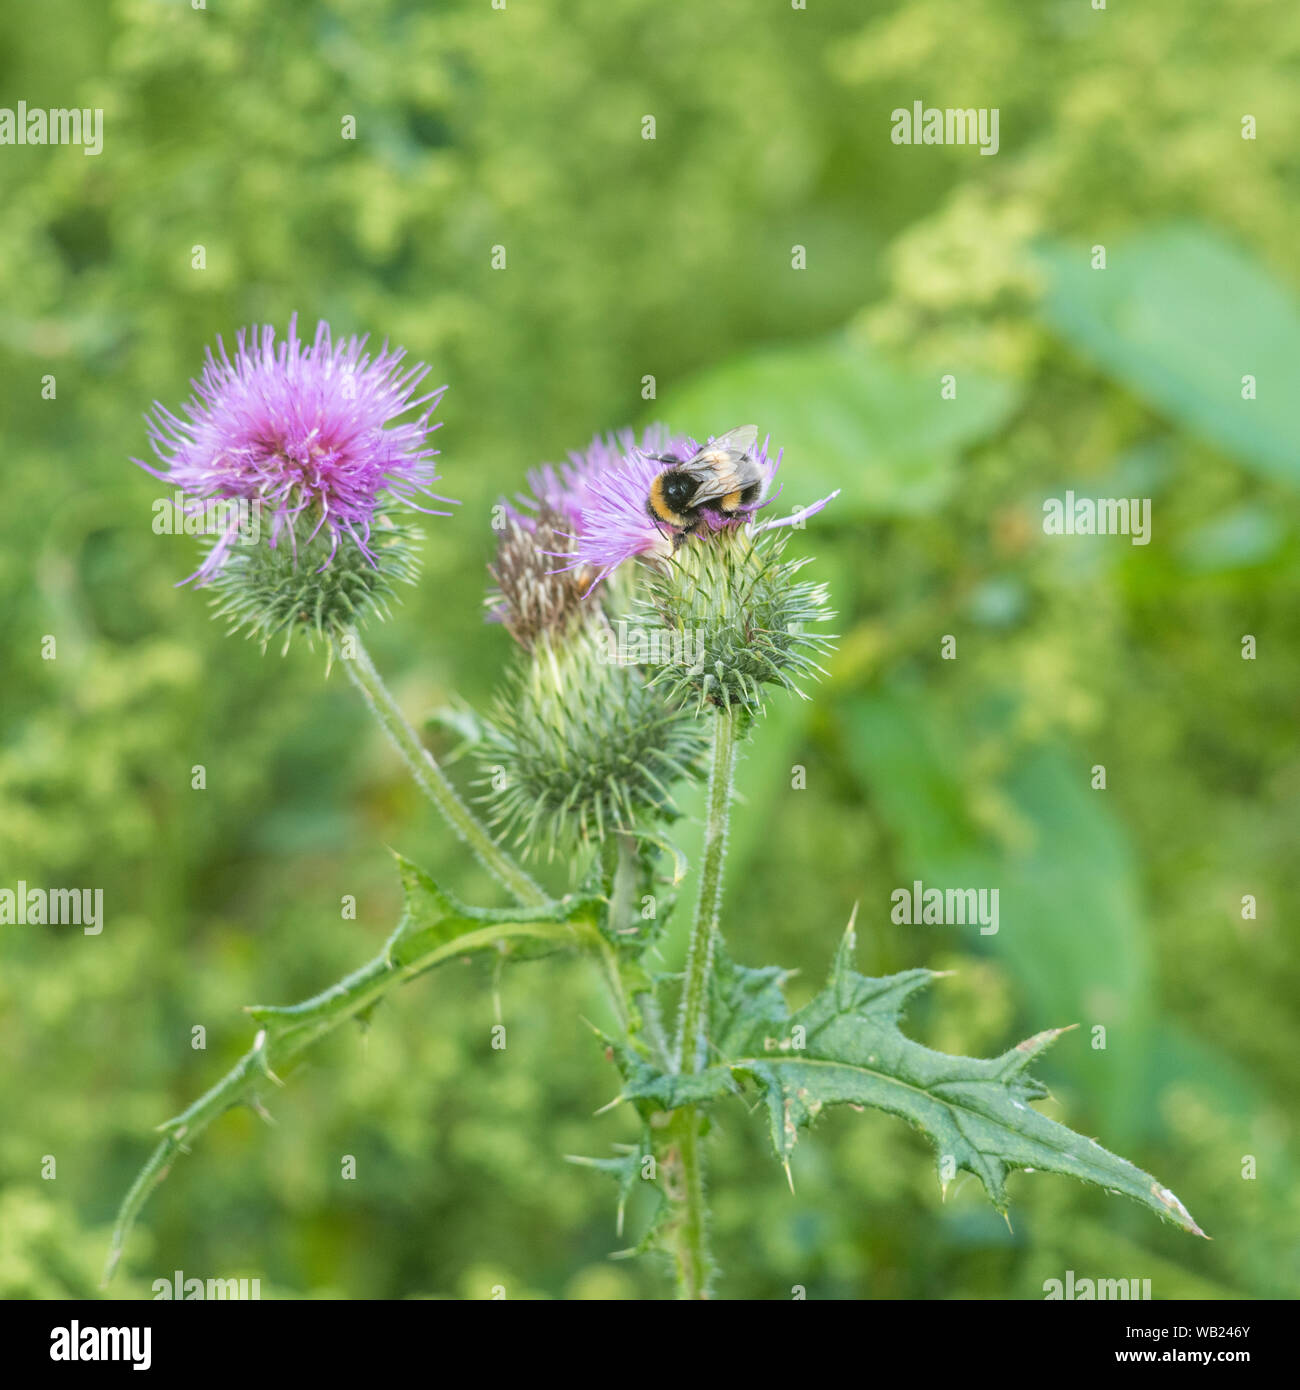 Honey bee foraging for pollen on the flower of a Spear Thistle / Cirsium vulgare. Metaphor honey production, bee population decline, bees in decline. Stock Photo